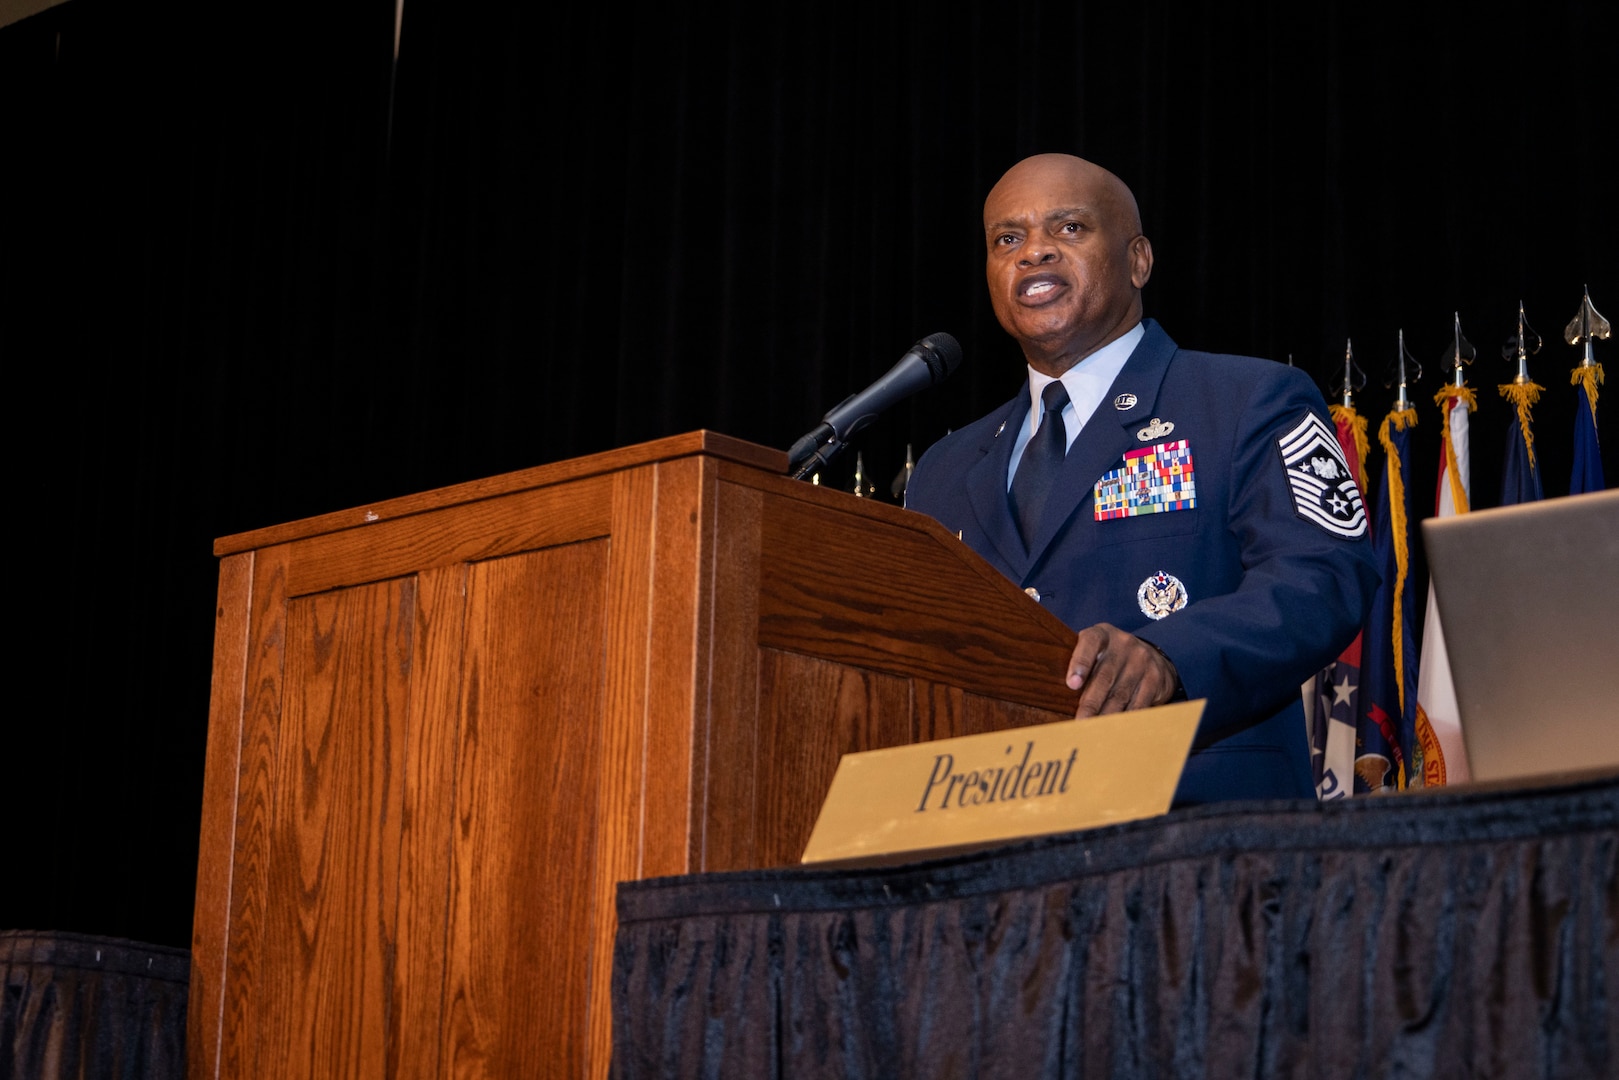 Senior Enlisted Advisor Tony L. Whitehead, the National Guard's top enlisted leader, addresses the second business session of the 52nd Annual Conference of the Enlisted Association of the National Guard of the United States at the Mayo Civic Center, Rochester, Minnesota, Aug 14, 2023.